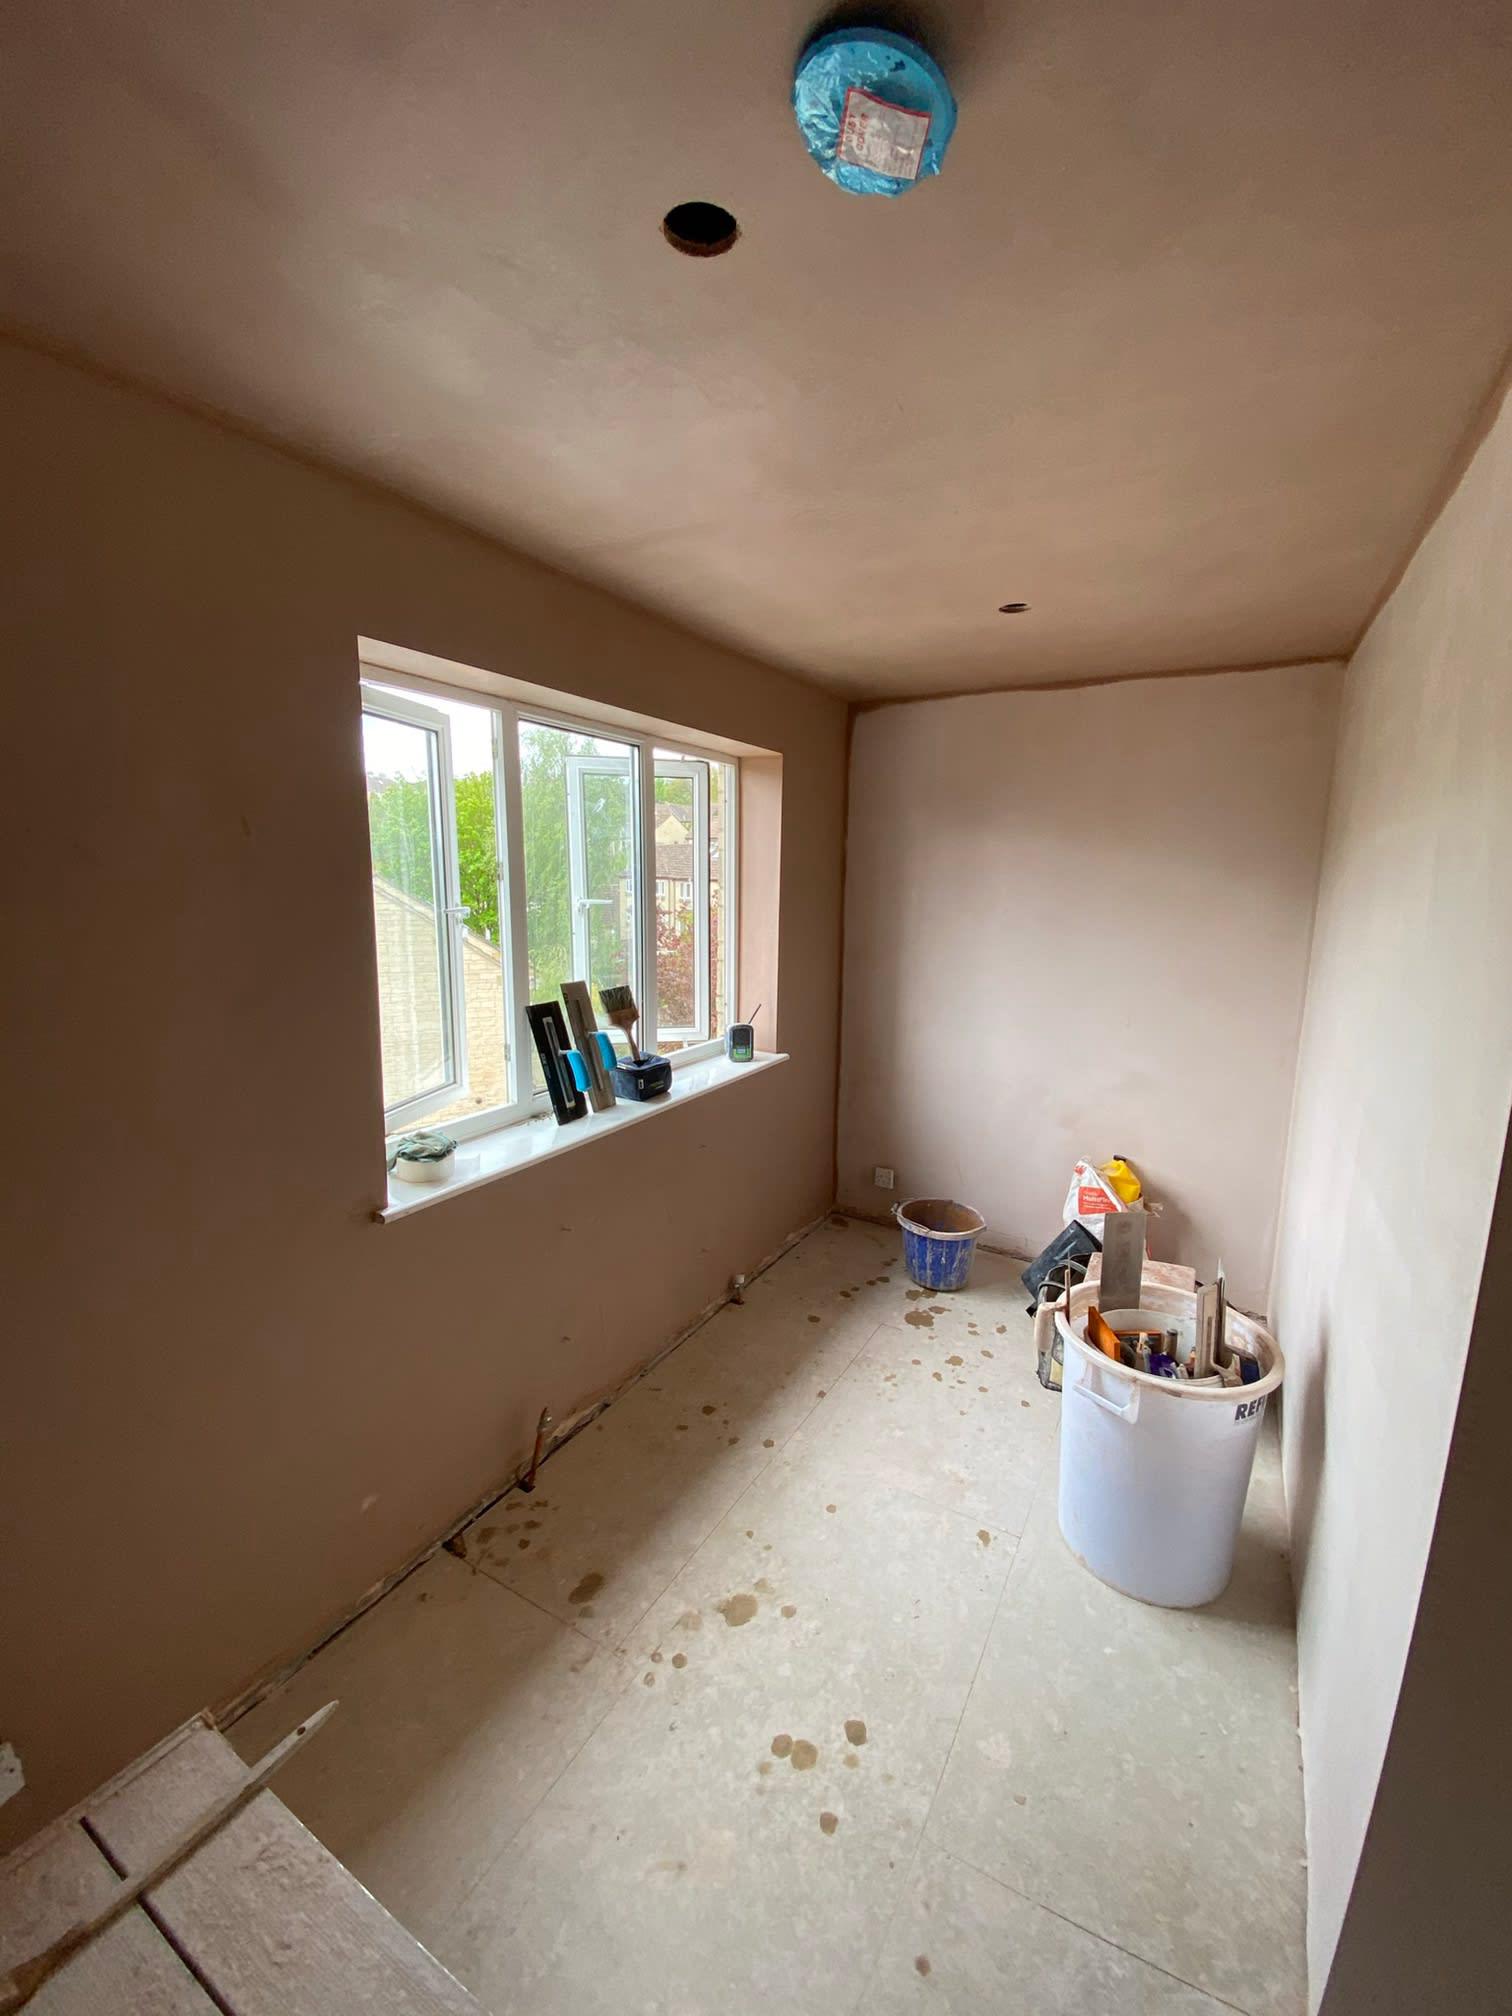 Images SG Plastering & Rendering Services